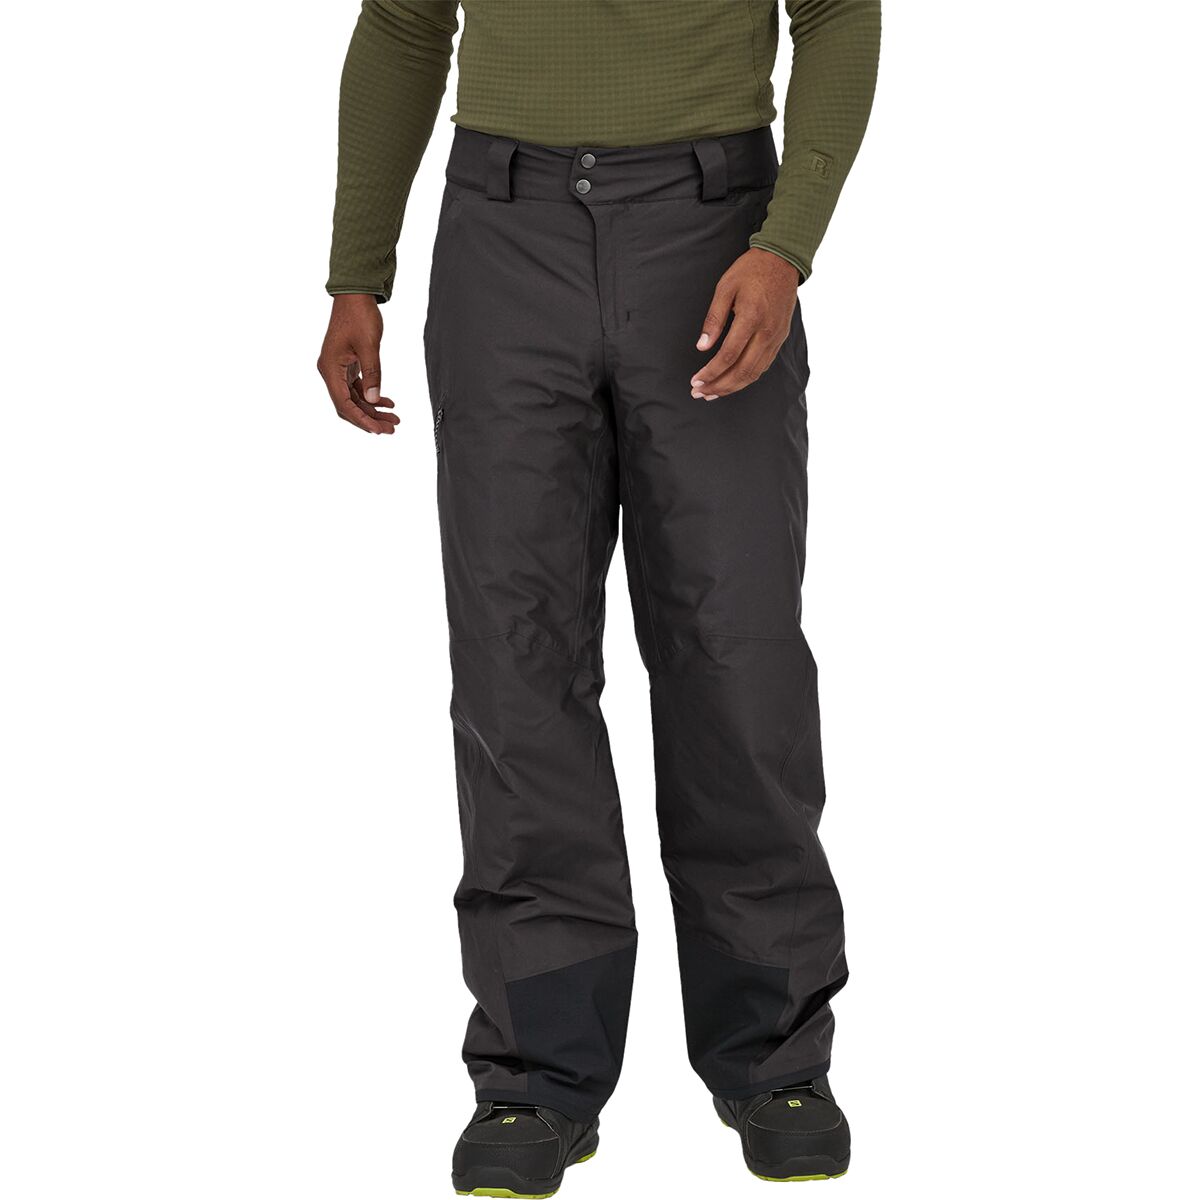 Insulated Powder Town Pant - Men